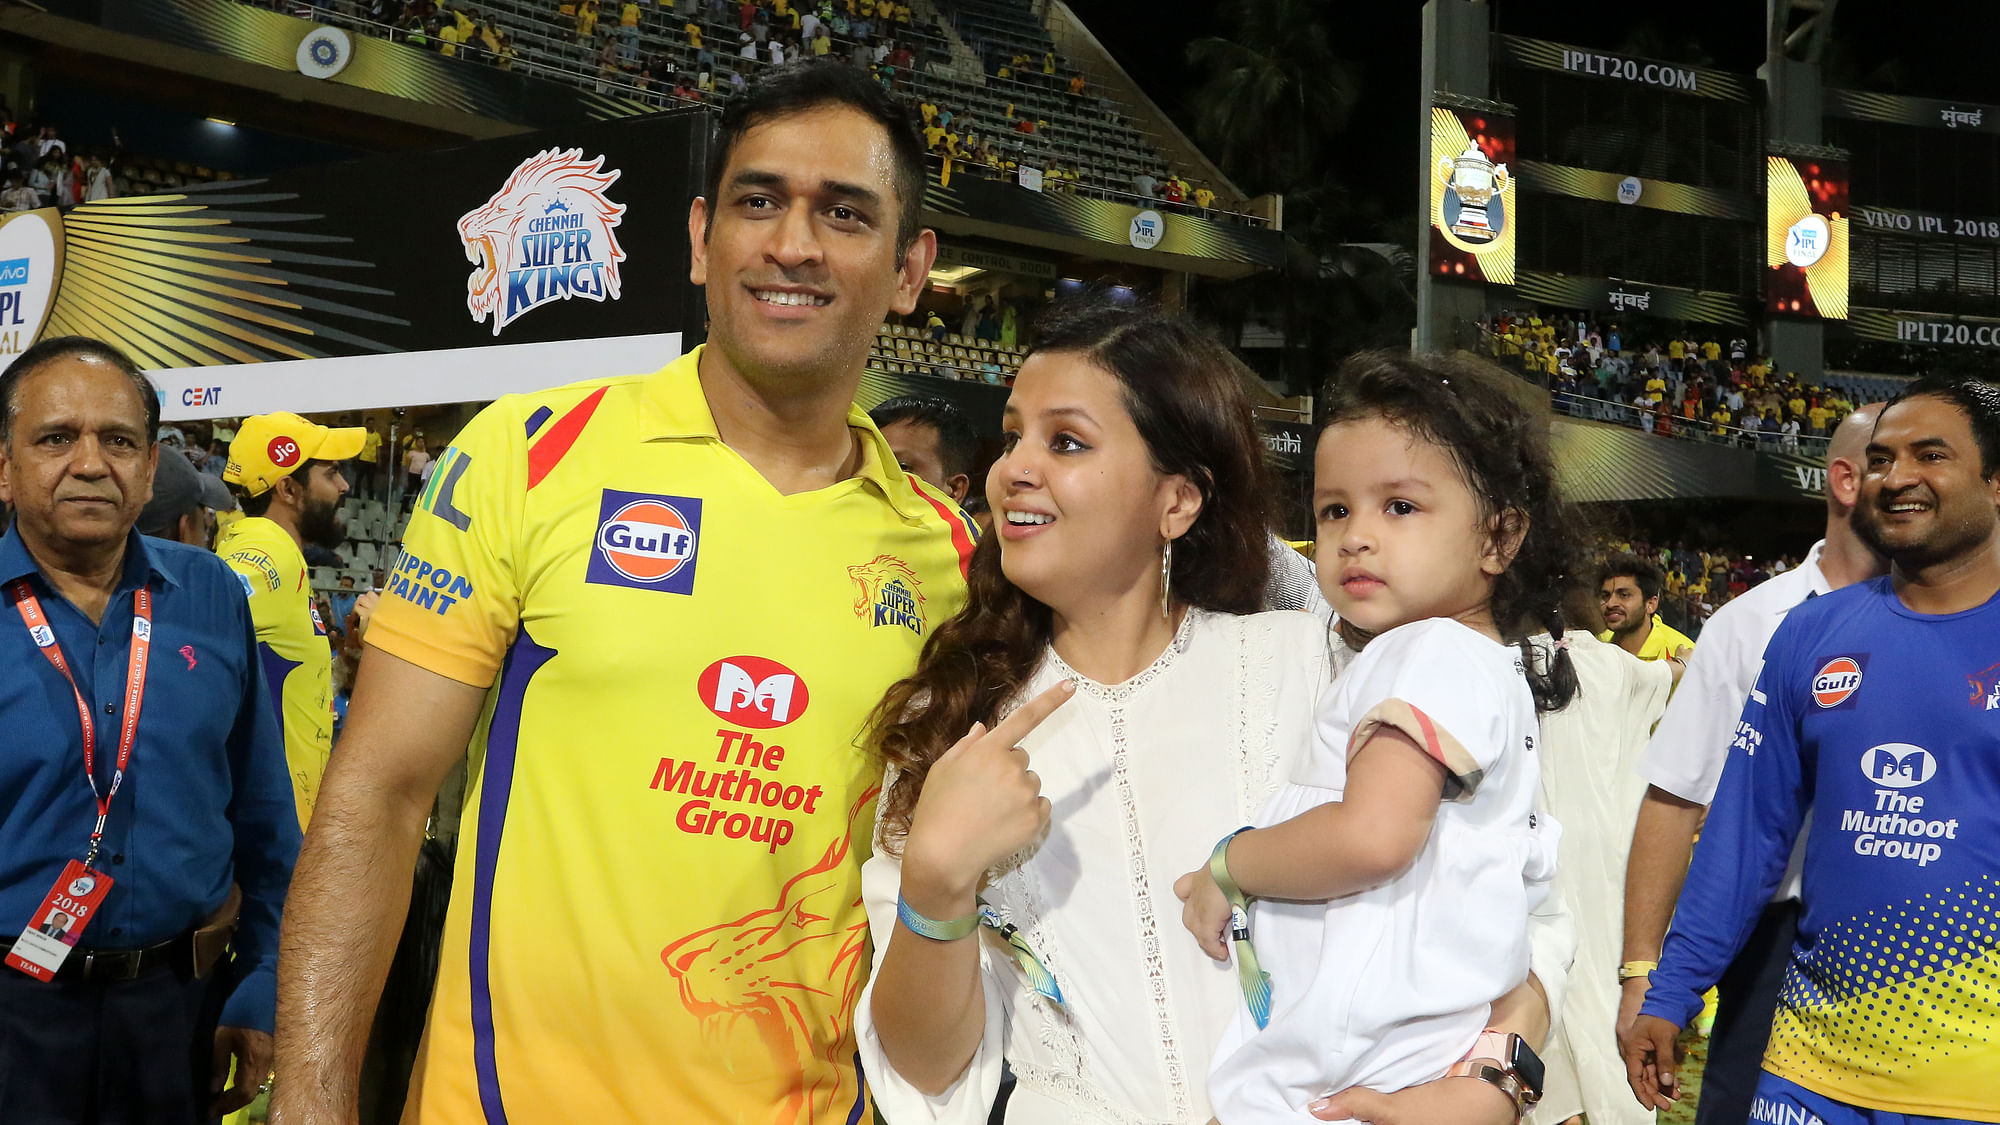 MS Dhoni and his daughter Ziva after the 2018 IPL Final in Mumbai that Chennai Super Kings won.